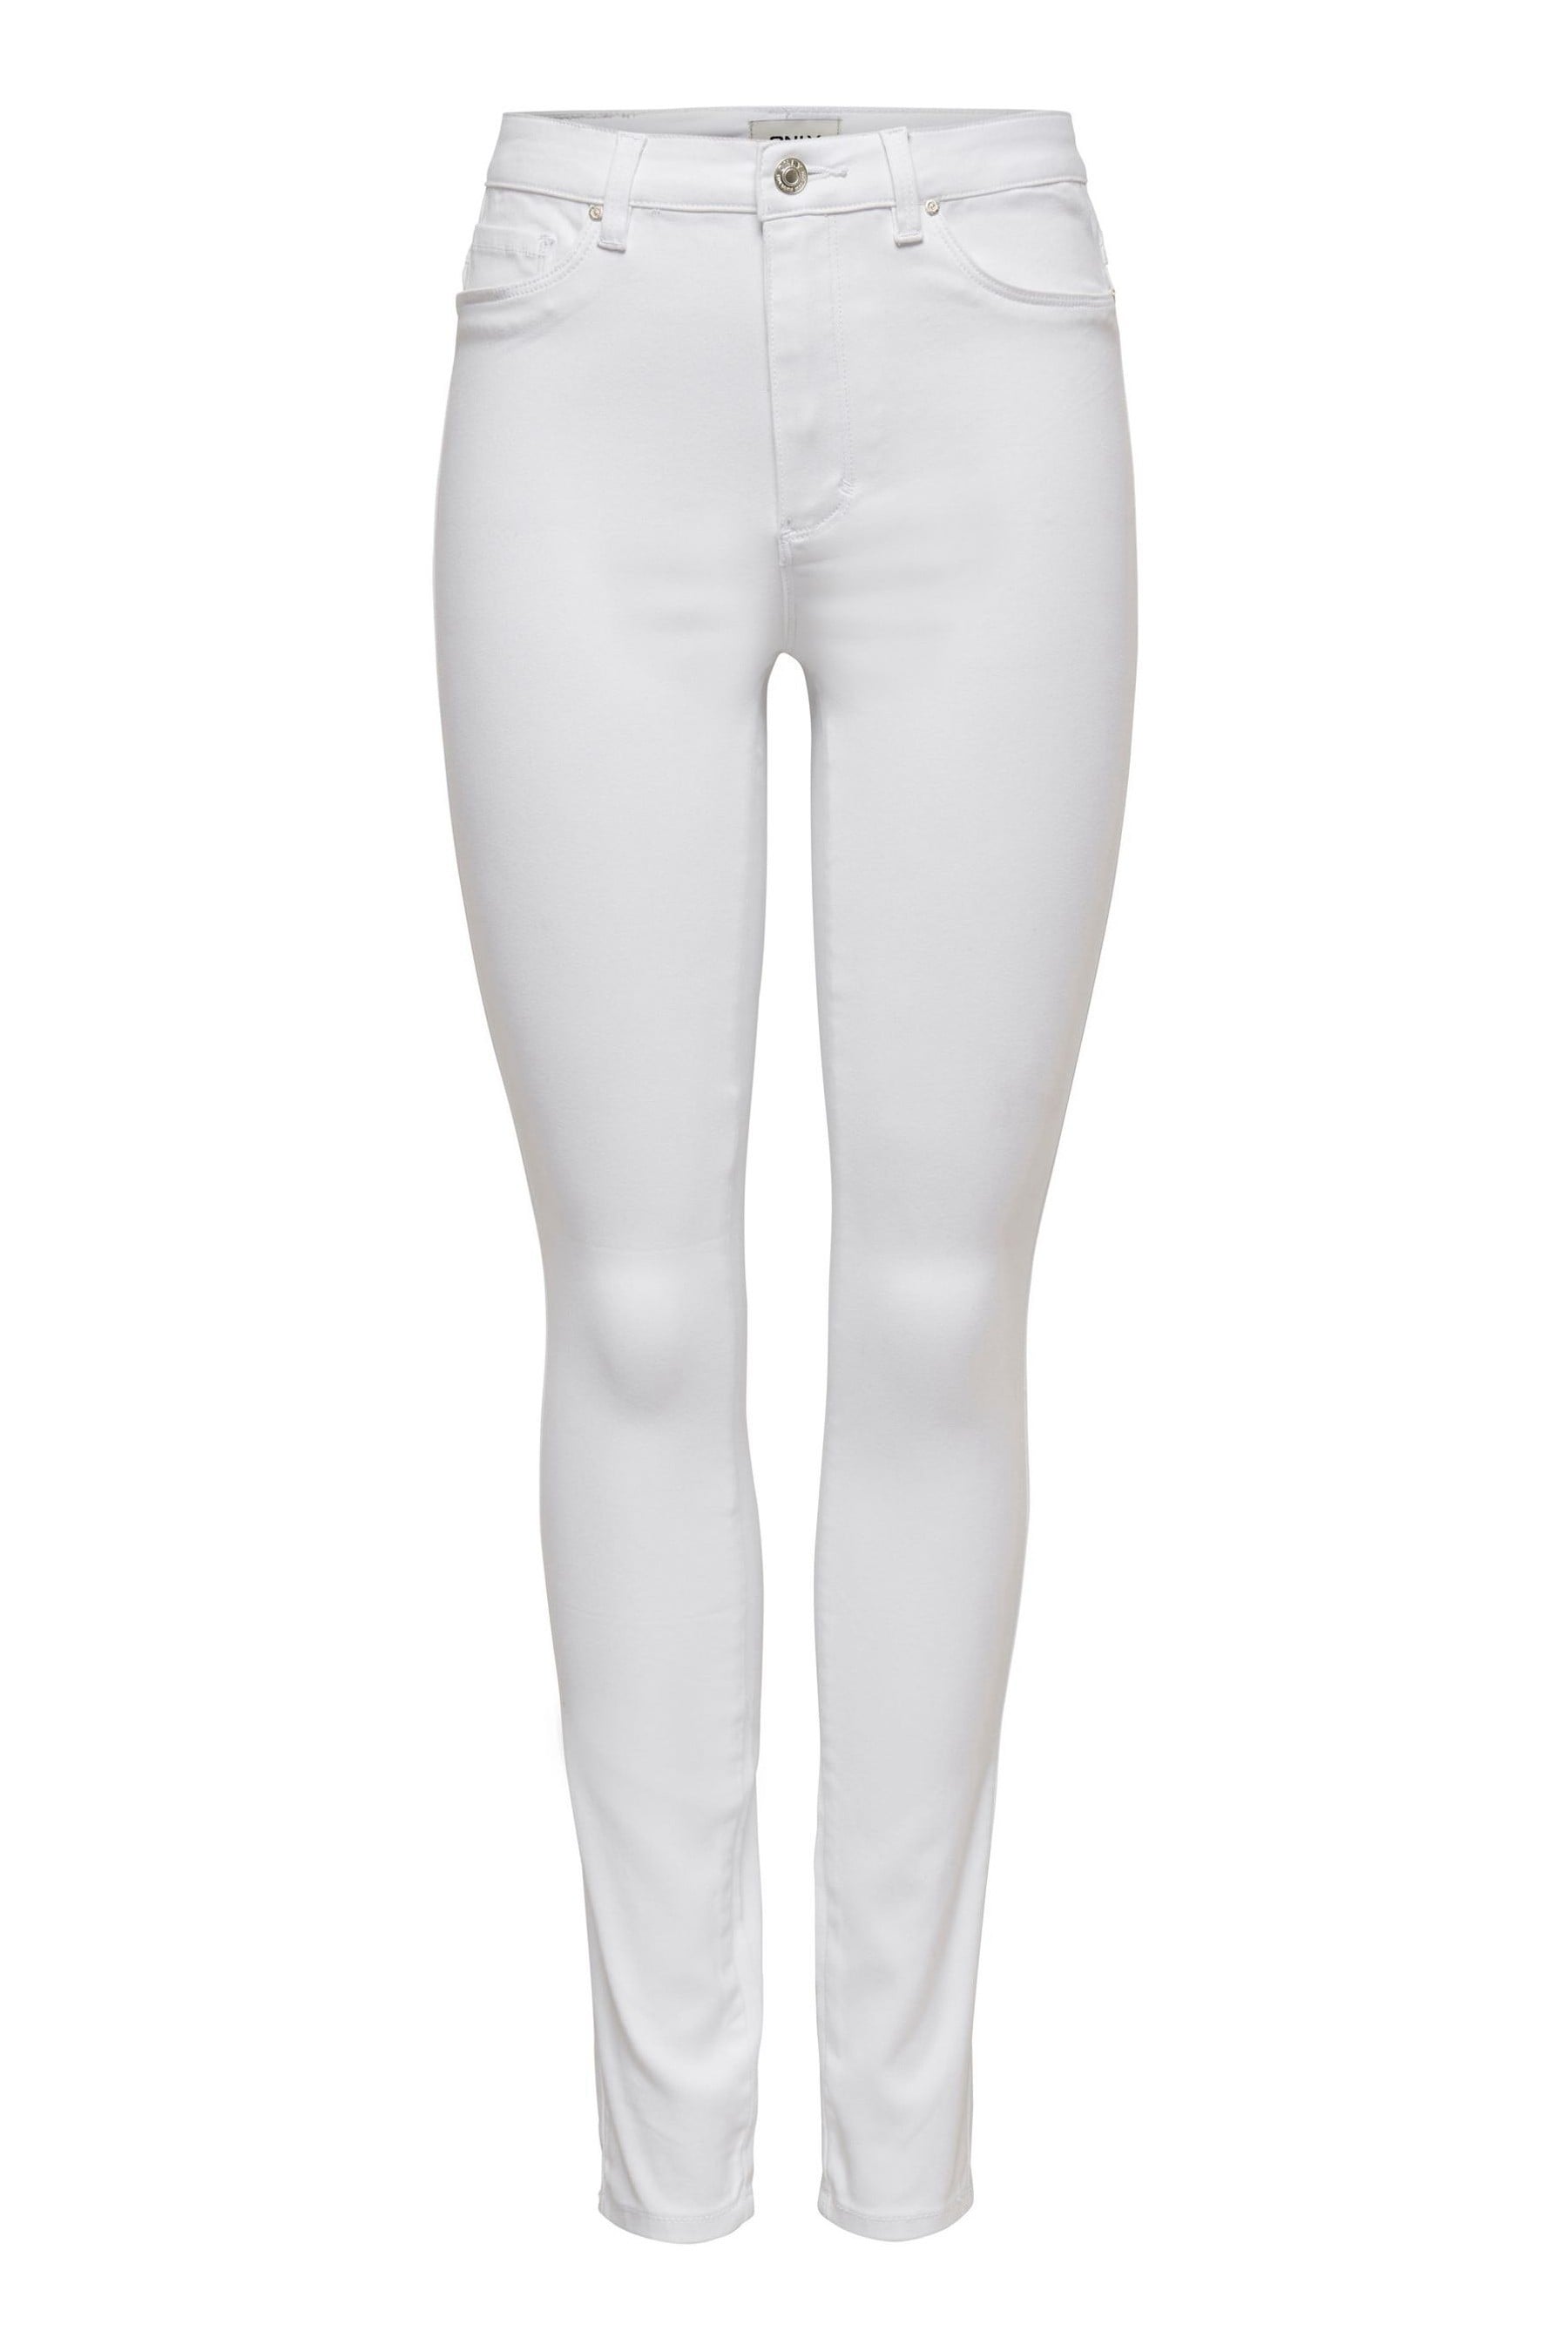 Buy Only White High Waist Stretch Skinny Jeans from the Next UK online shop